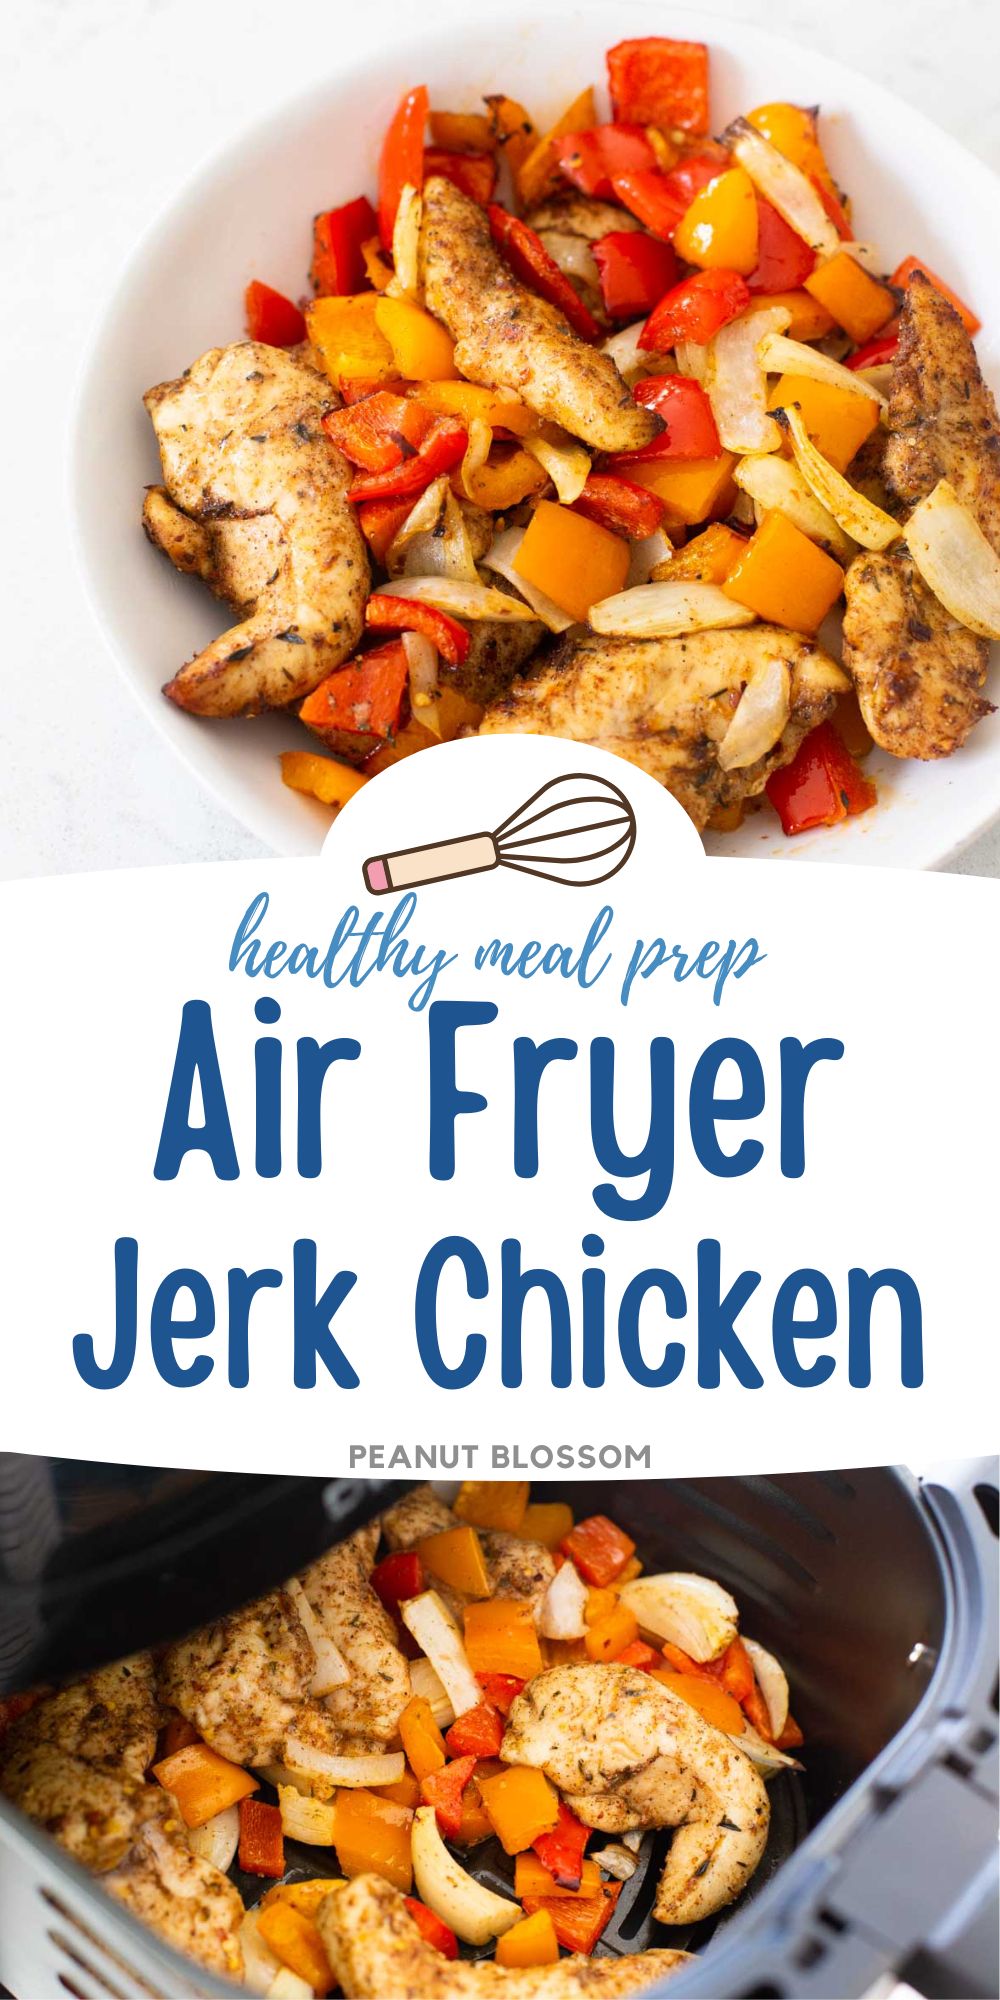 The photo collage shows the jerk chicken and peppers in a bowl next to a photo of it all cooking in an air fryer basket.